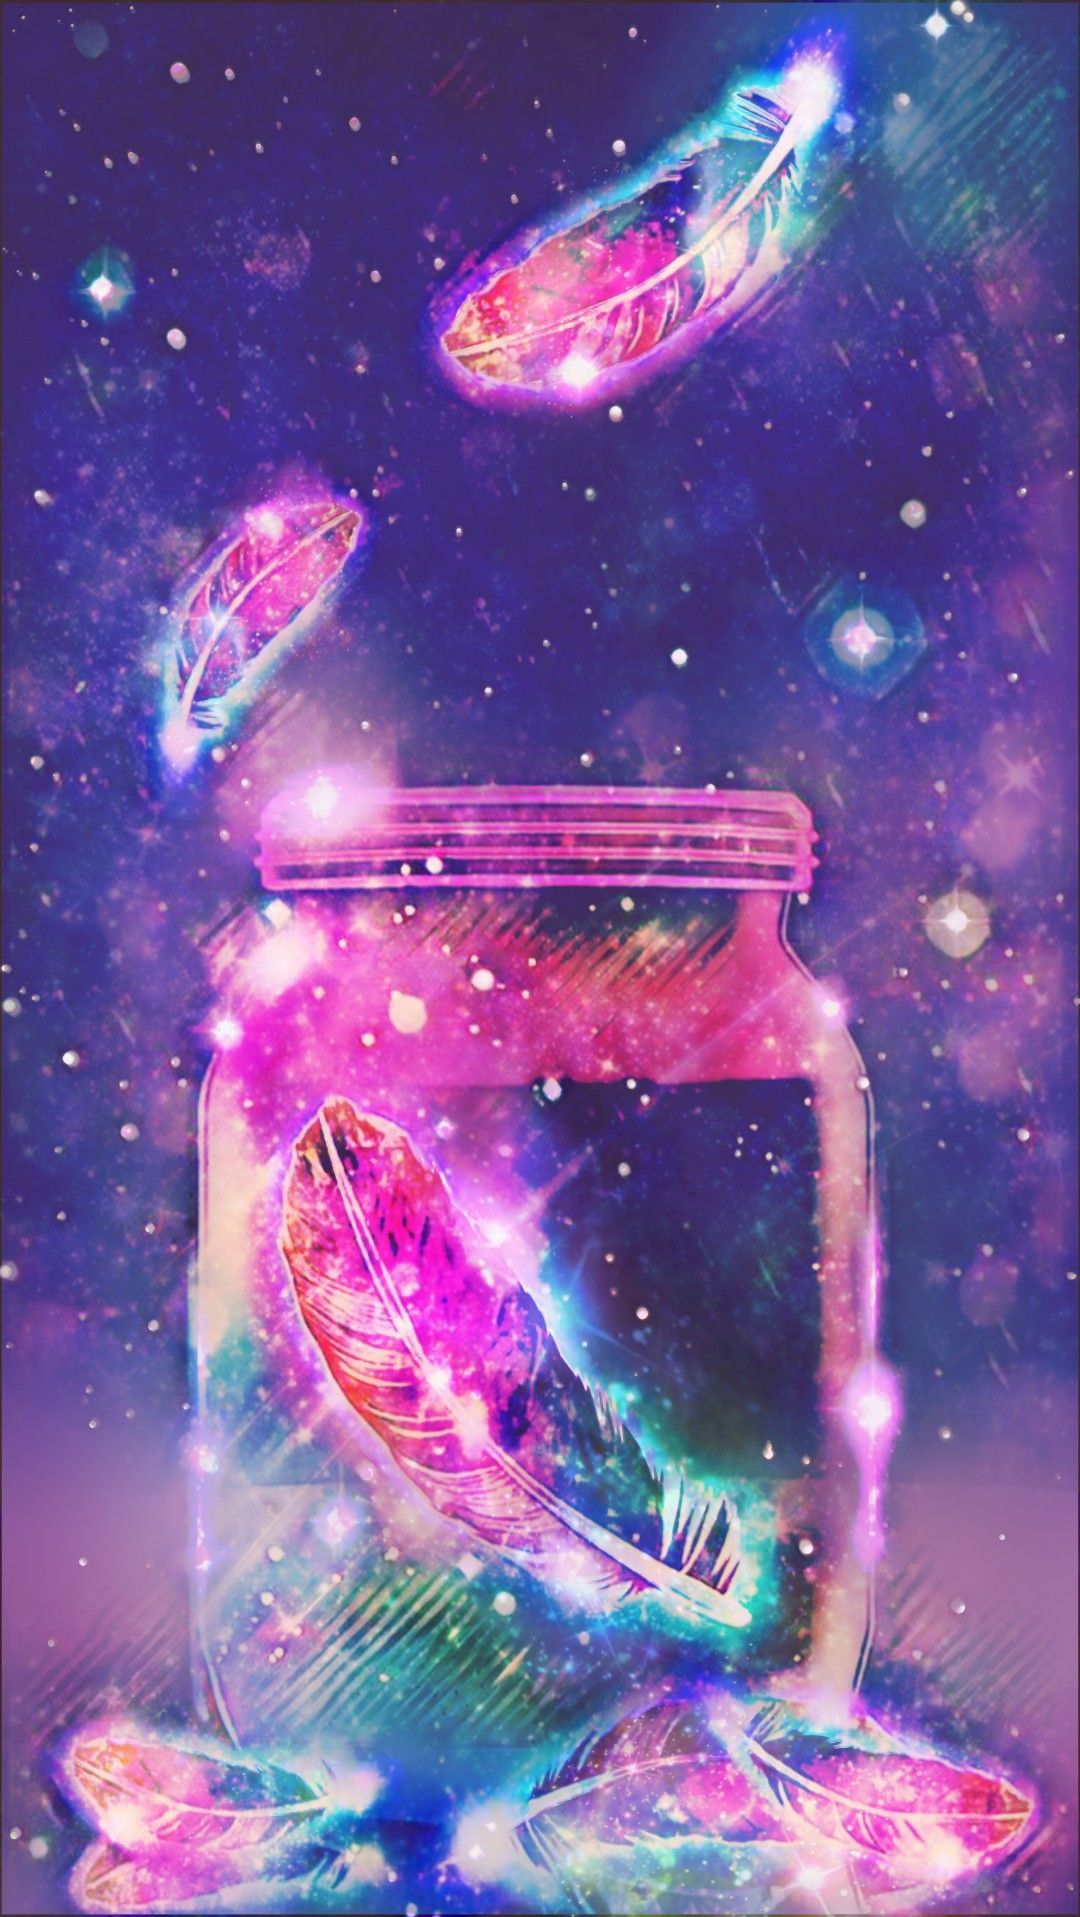 Jar Of Feathers Galaxy, made by me #purple #sparkly #wallpaper